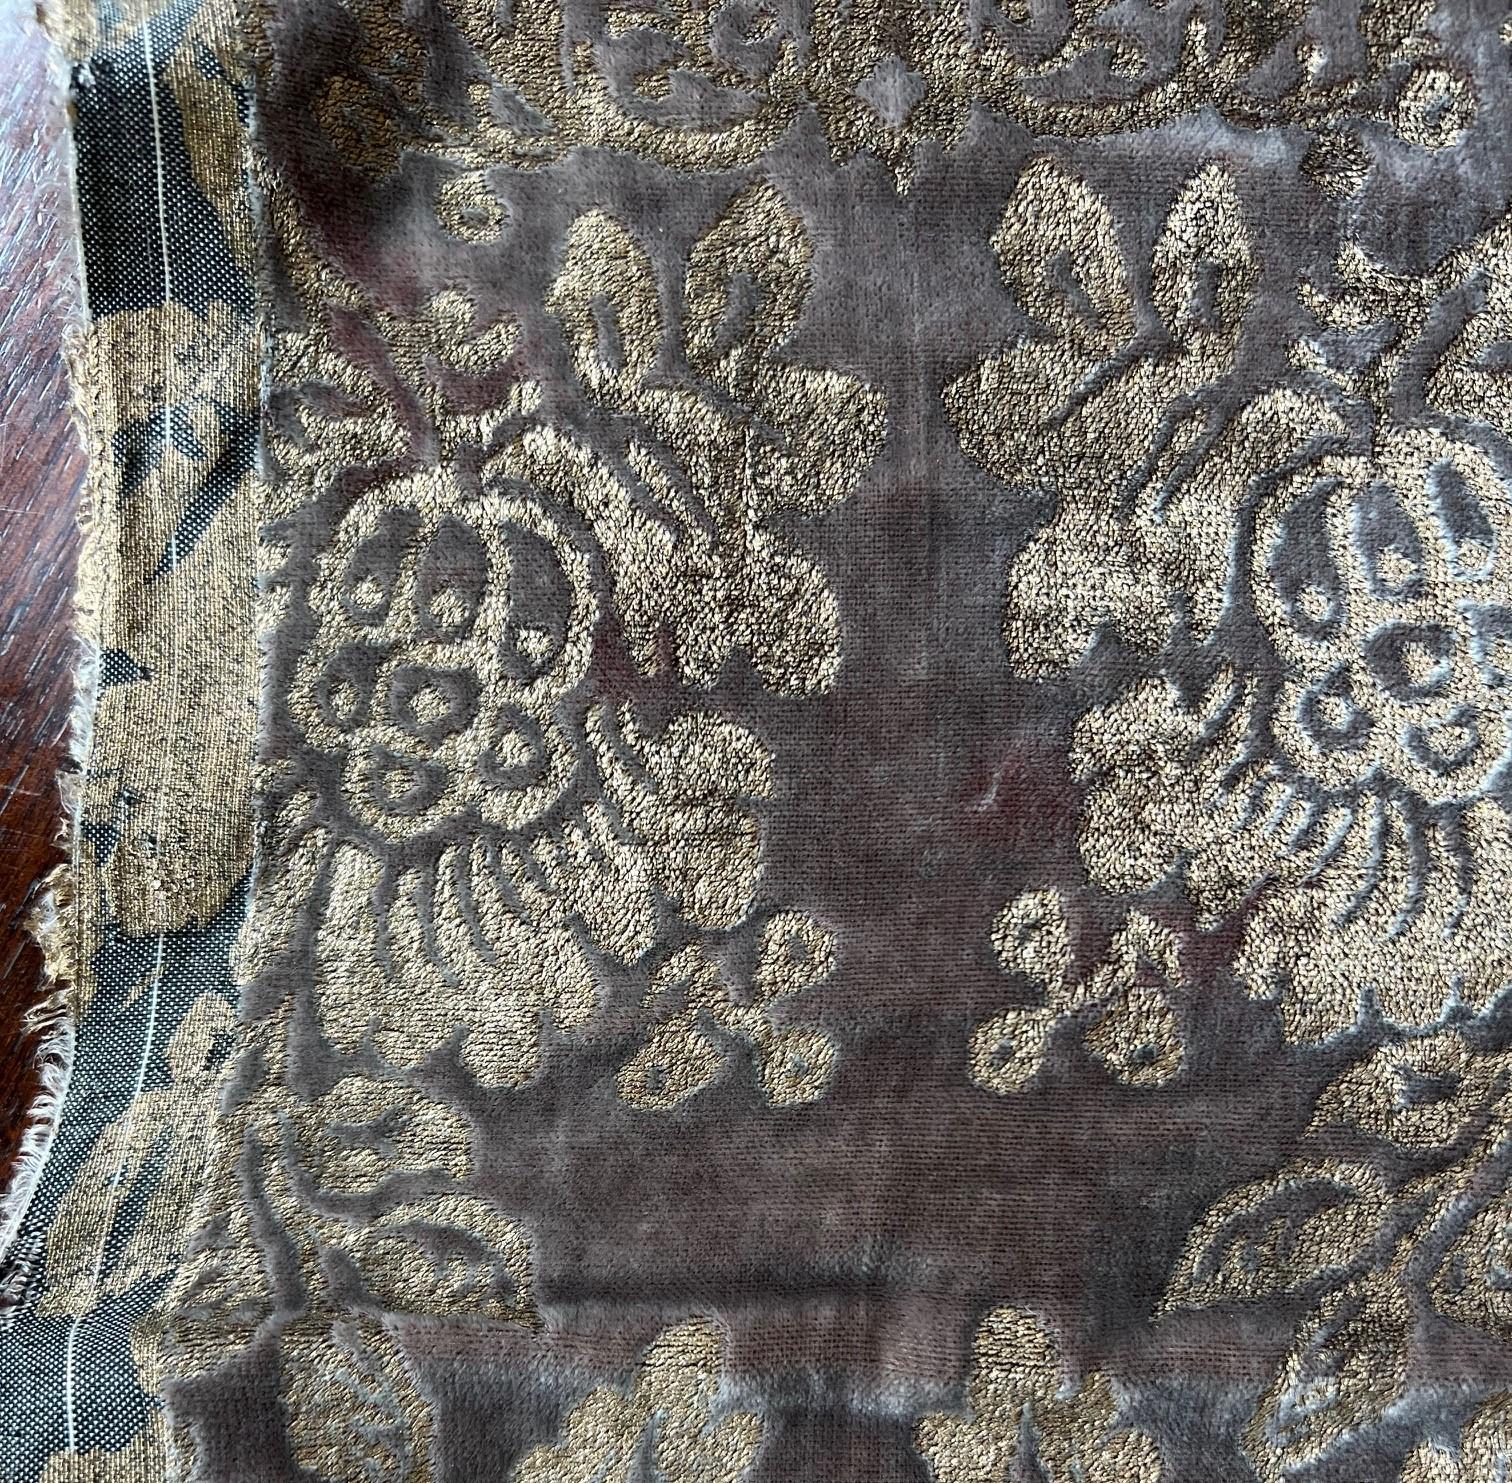 Dyed Rare Fortuny Silk Velvet in Warm French Brown, Stenciled with Pigmented Gold For Sale